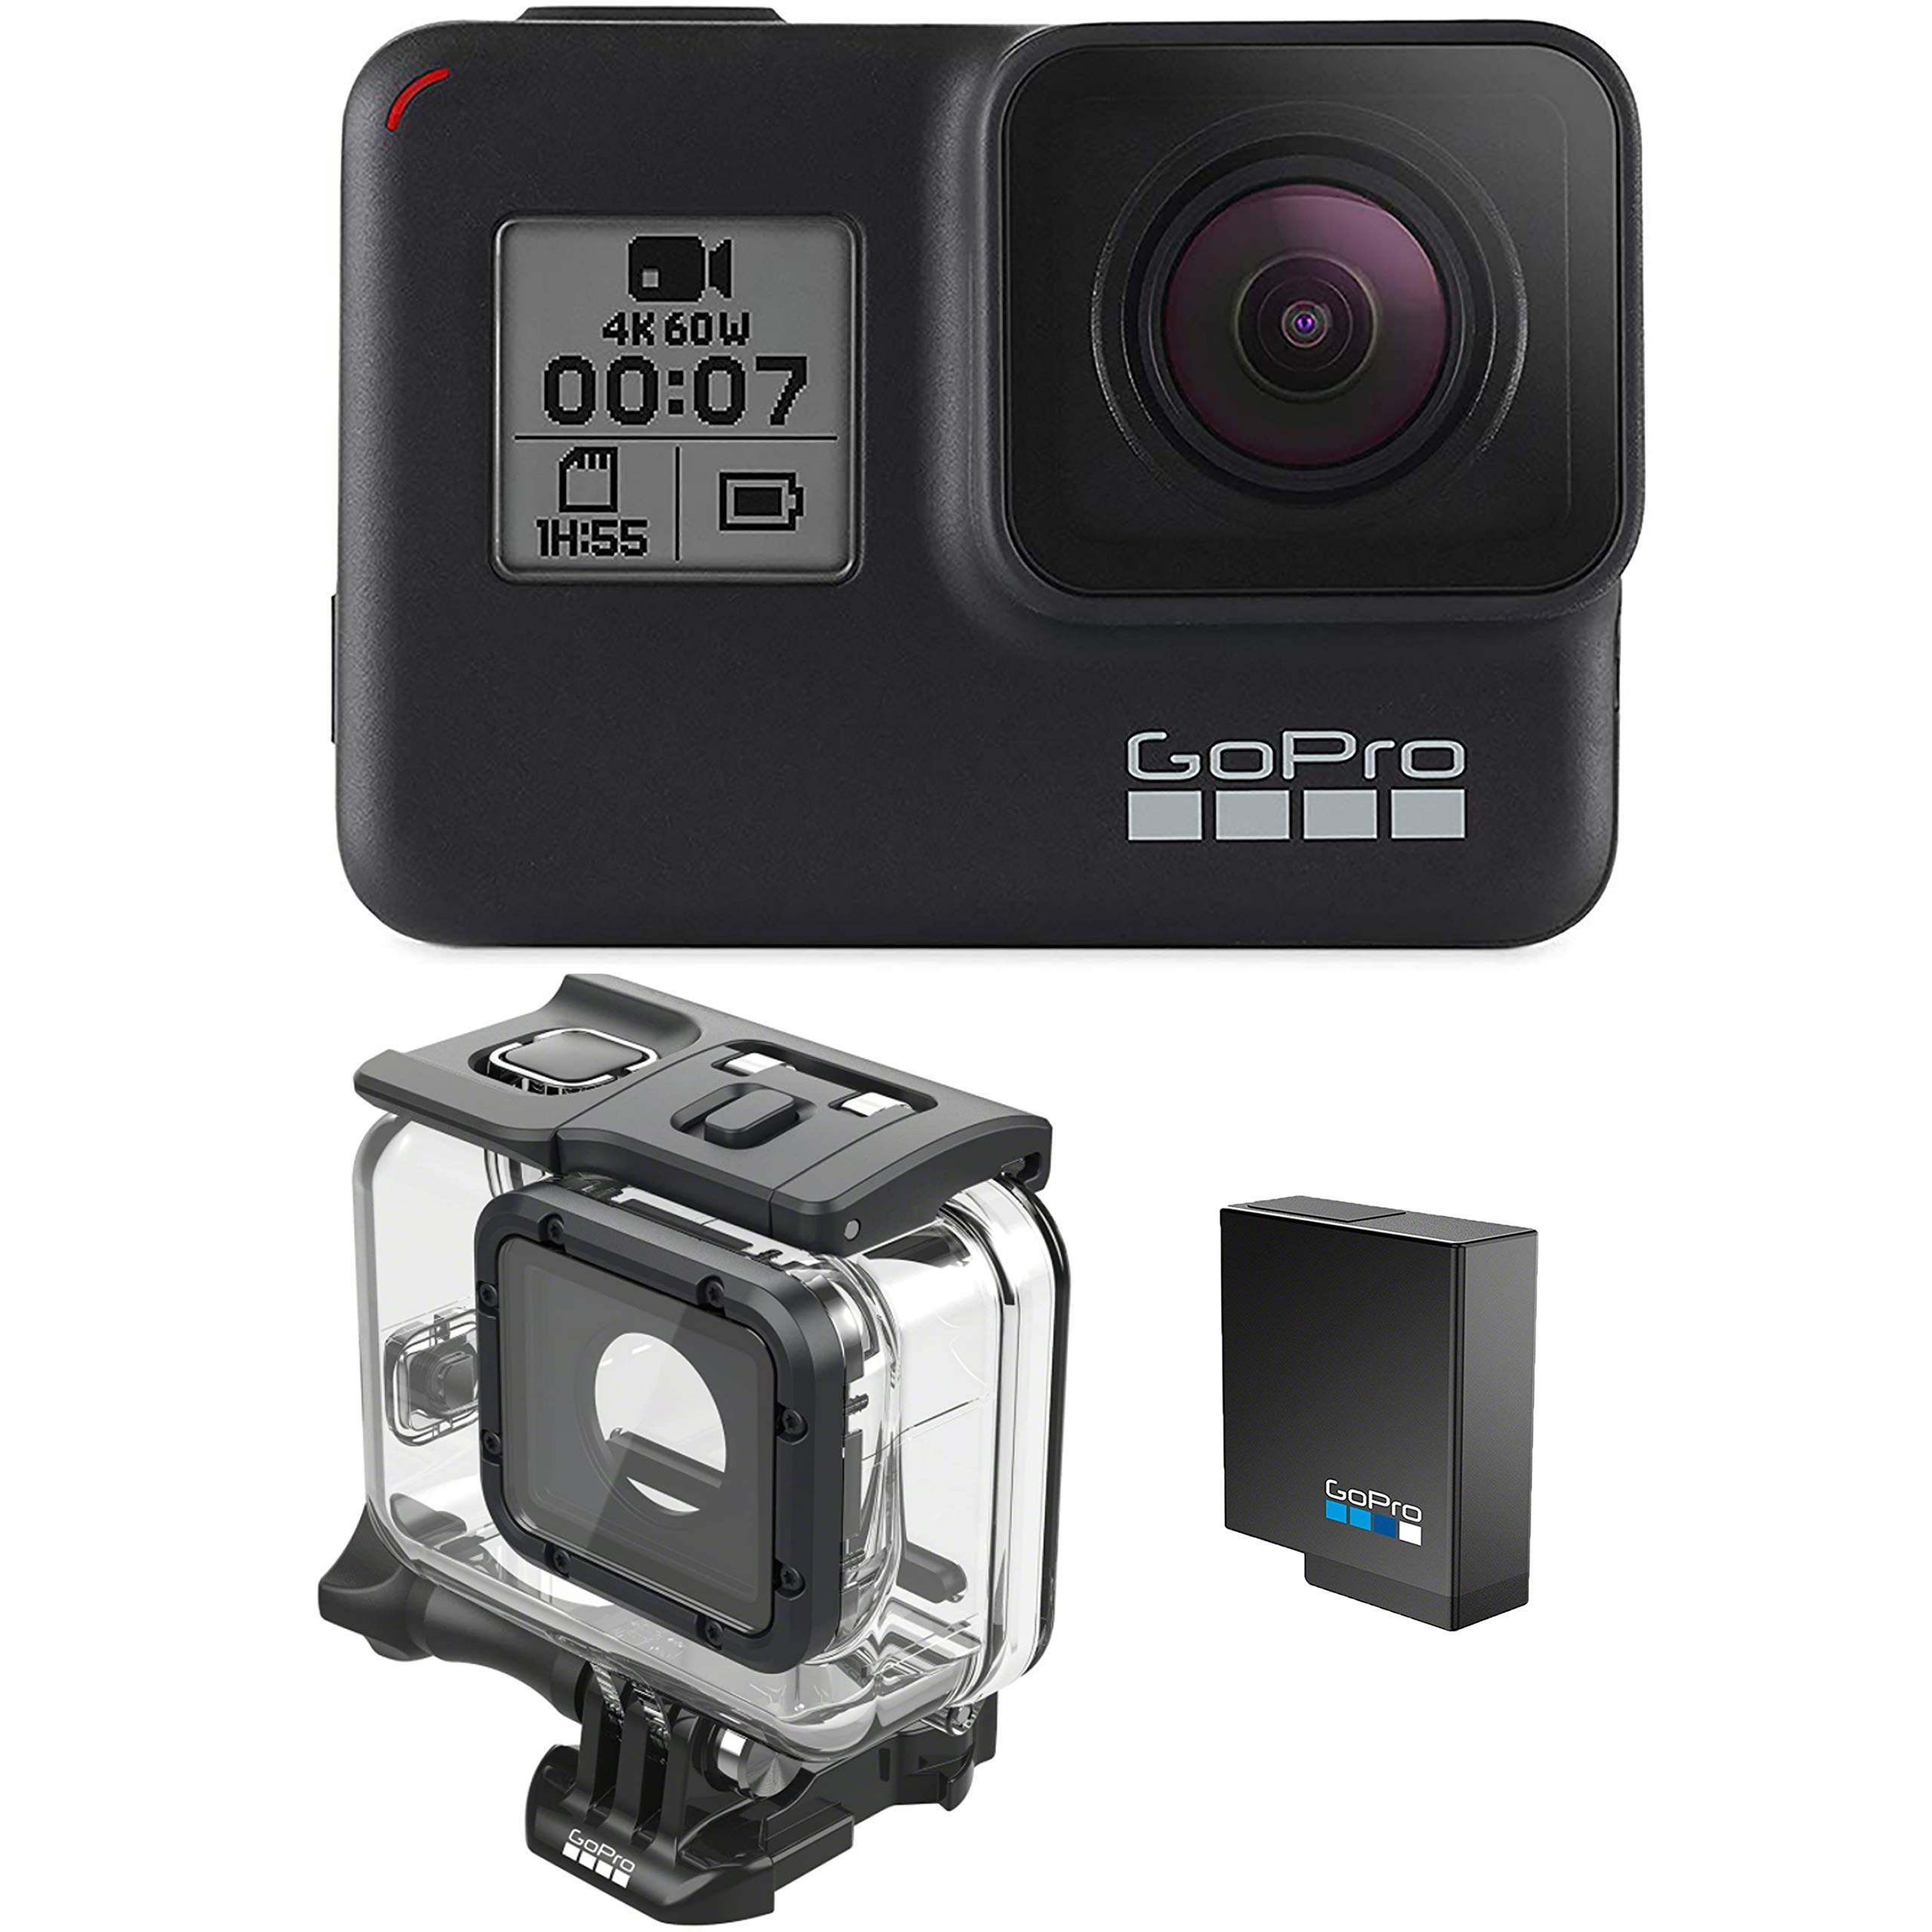 GoPro HERO7 Black + Extra Battery + Super Suit Dive Housing Case - E-Commerce Packaging - Waterproof Digital Action Camera with Touch Screen 4K HD Video 12MP Photos Live Streaming Stabilization